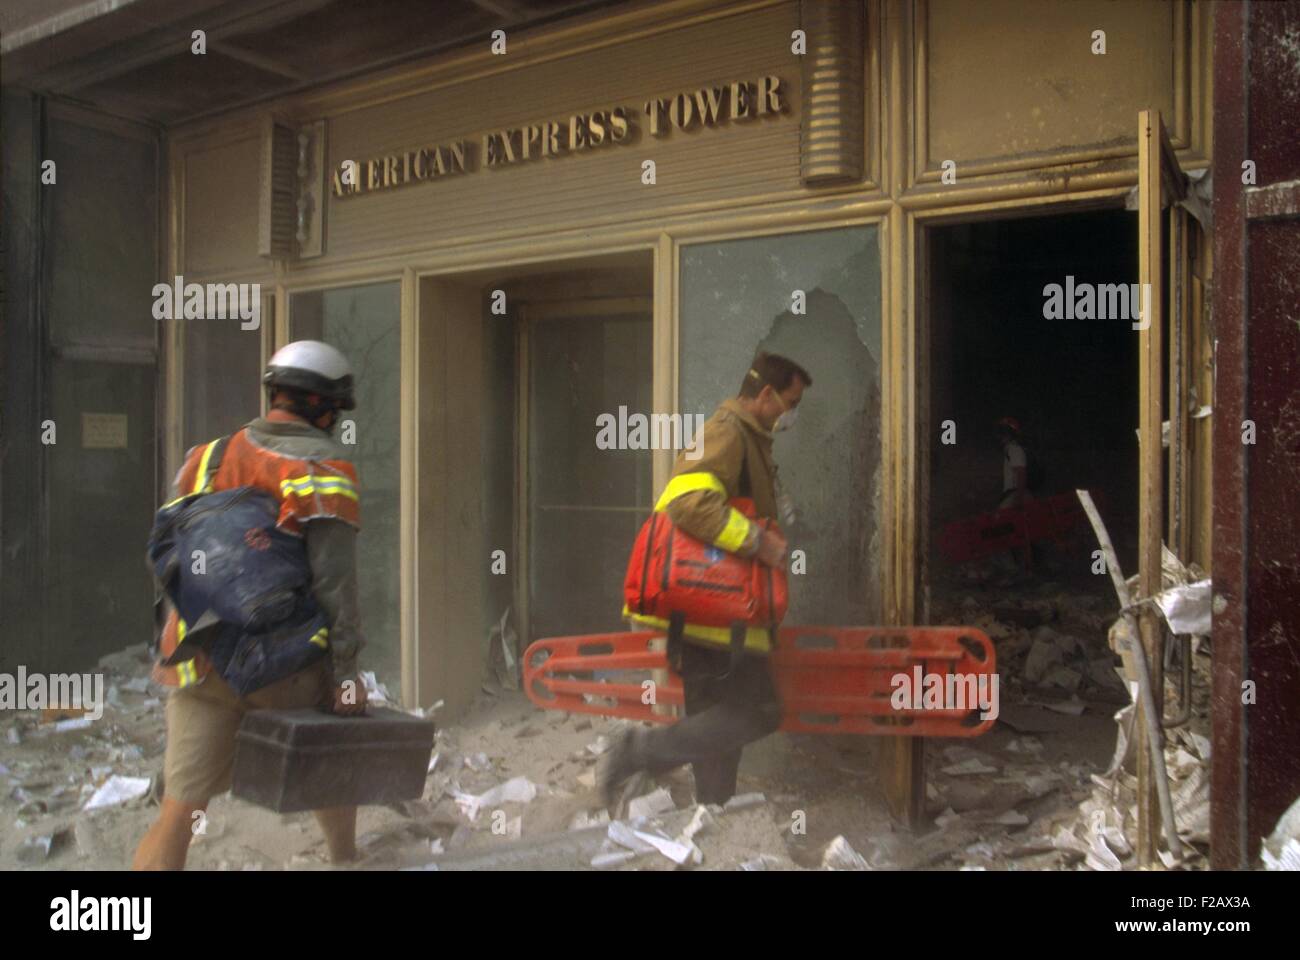 Rescue workers enter the American Express Tower, World Financial Center 3, following 9-11 terrorist attack. They carry orange litters into the debris battered building across the West Side Highway from the World Trade Center complex. (BSLOC 2015 2 60) Stock Photo